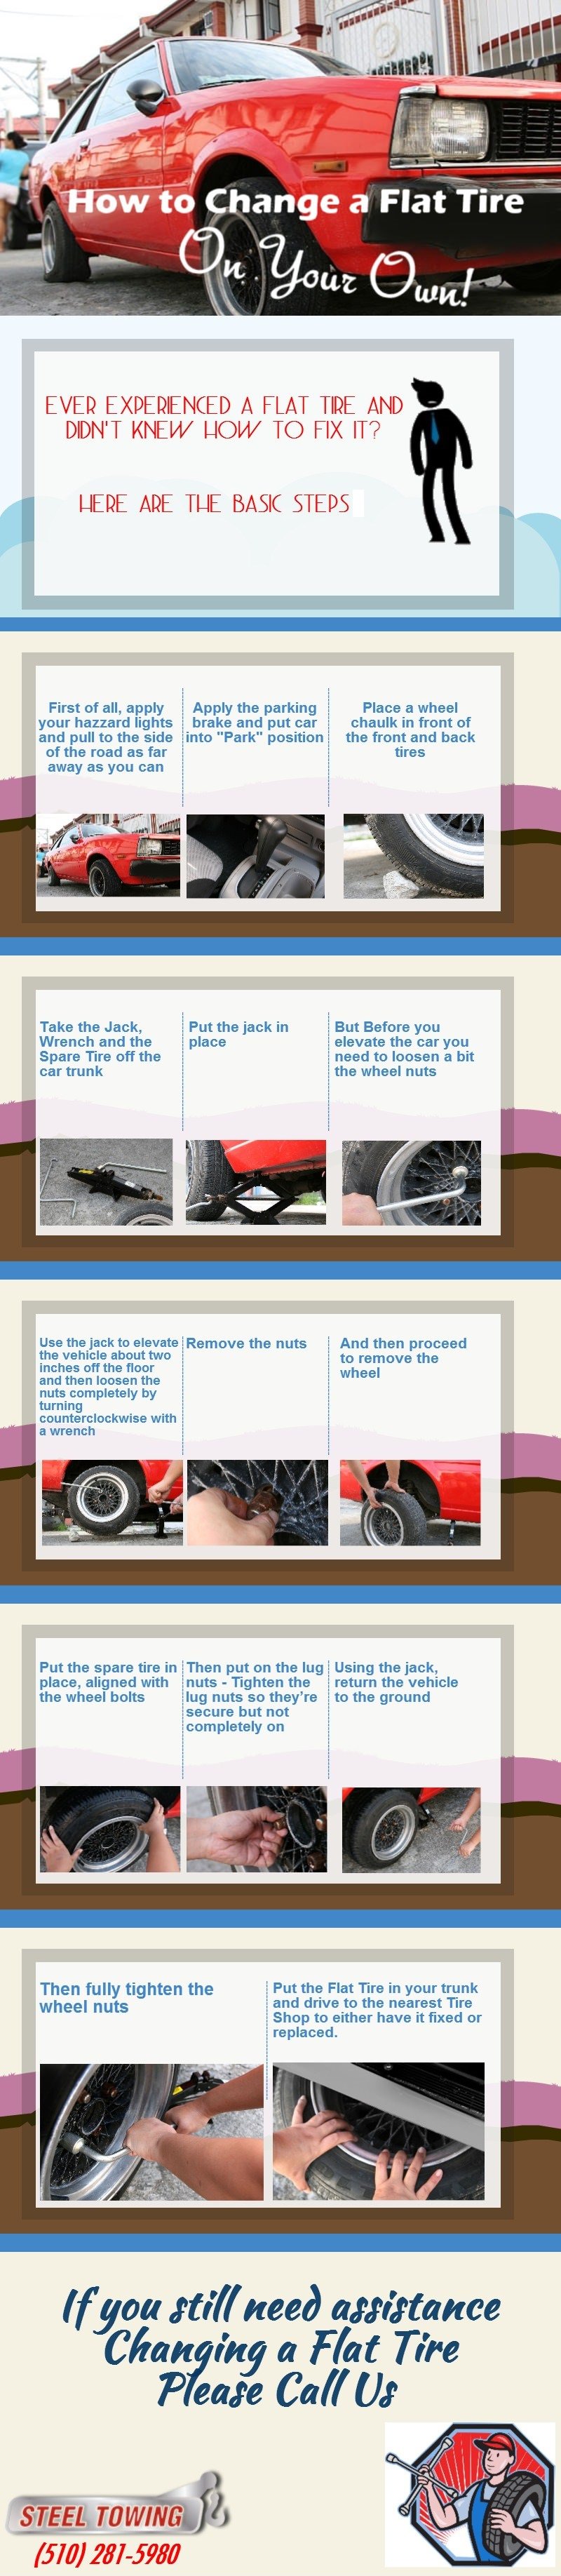 How to change a Flat Tire